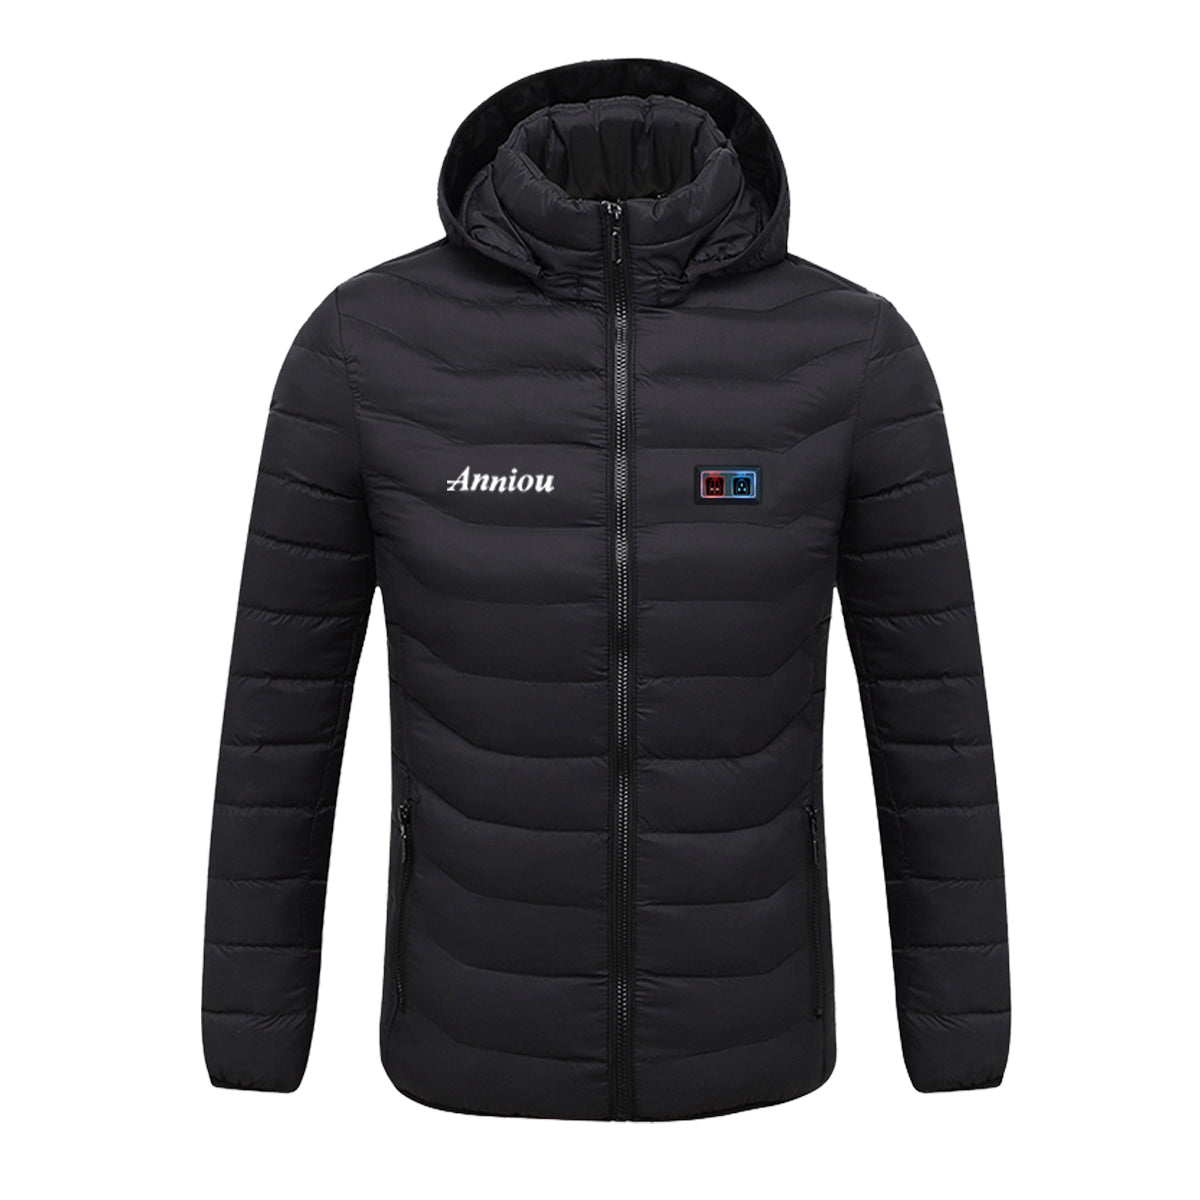 Sidiou Group Anniou Dual Switch Electric Heated Jacket Rechargeable Battery USB Heating Jacket Men Women Adjustable Temperature Winter Warm Cotton Hooded Heated Coat